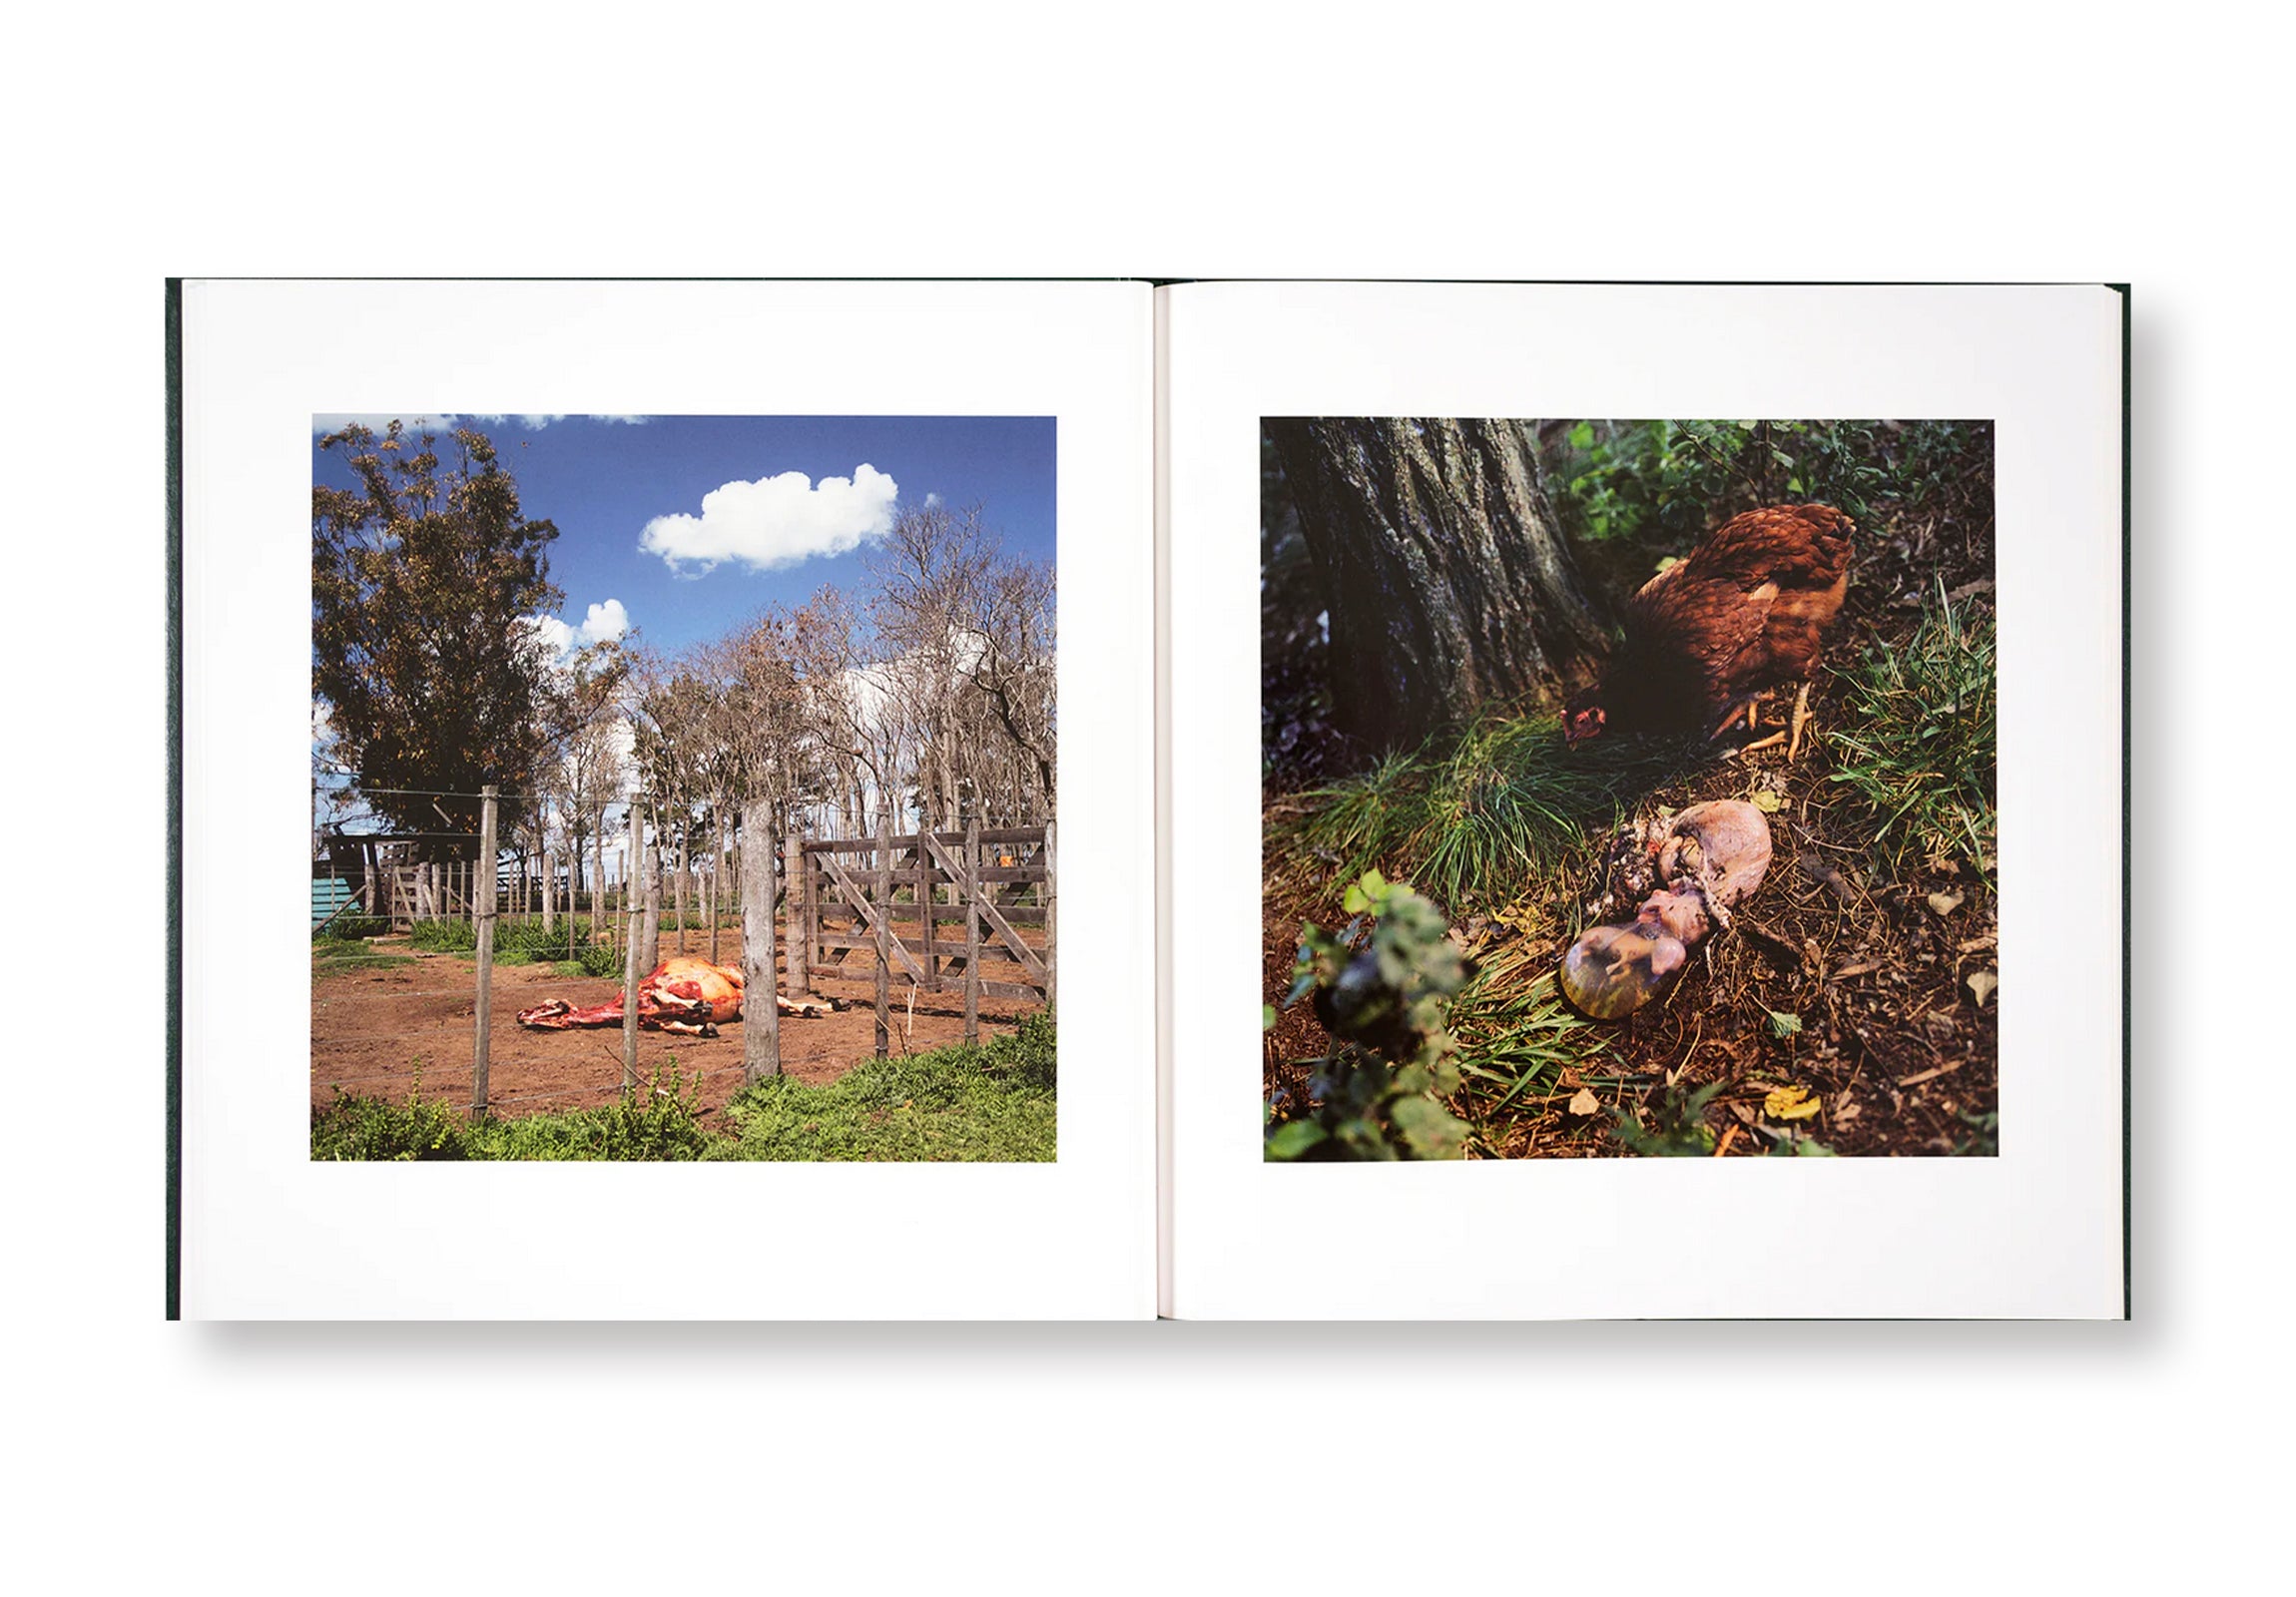 ON THE SIXTH DAY by Alessandra Sanguinetti